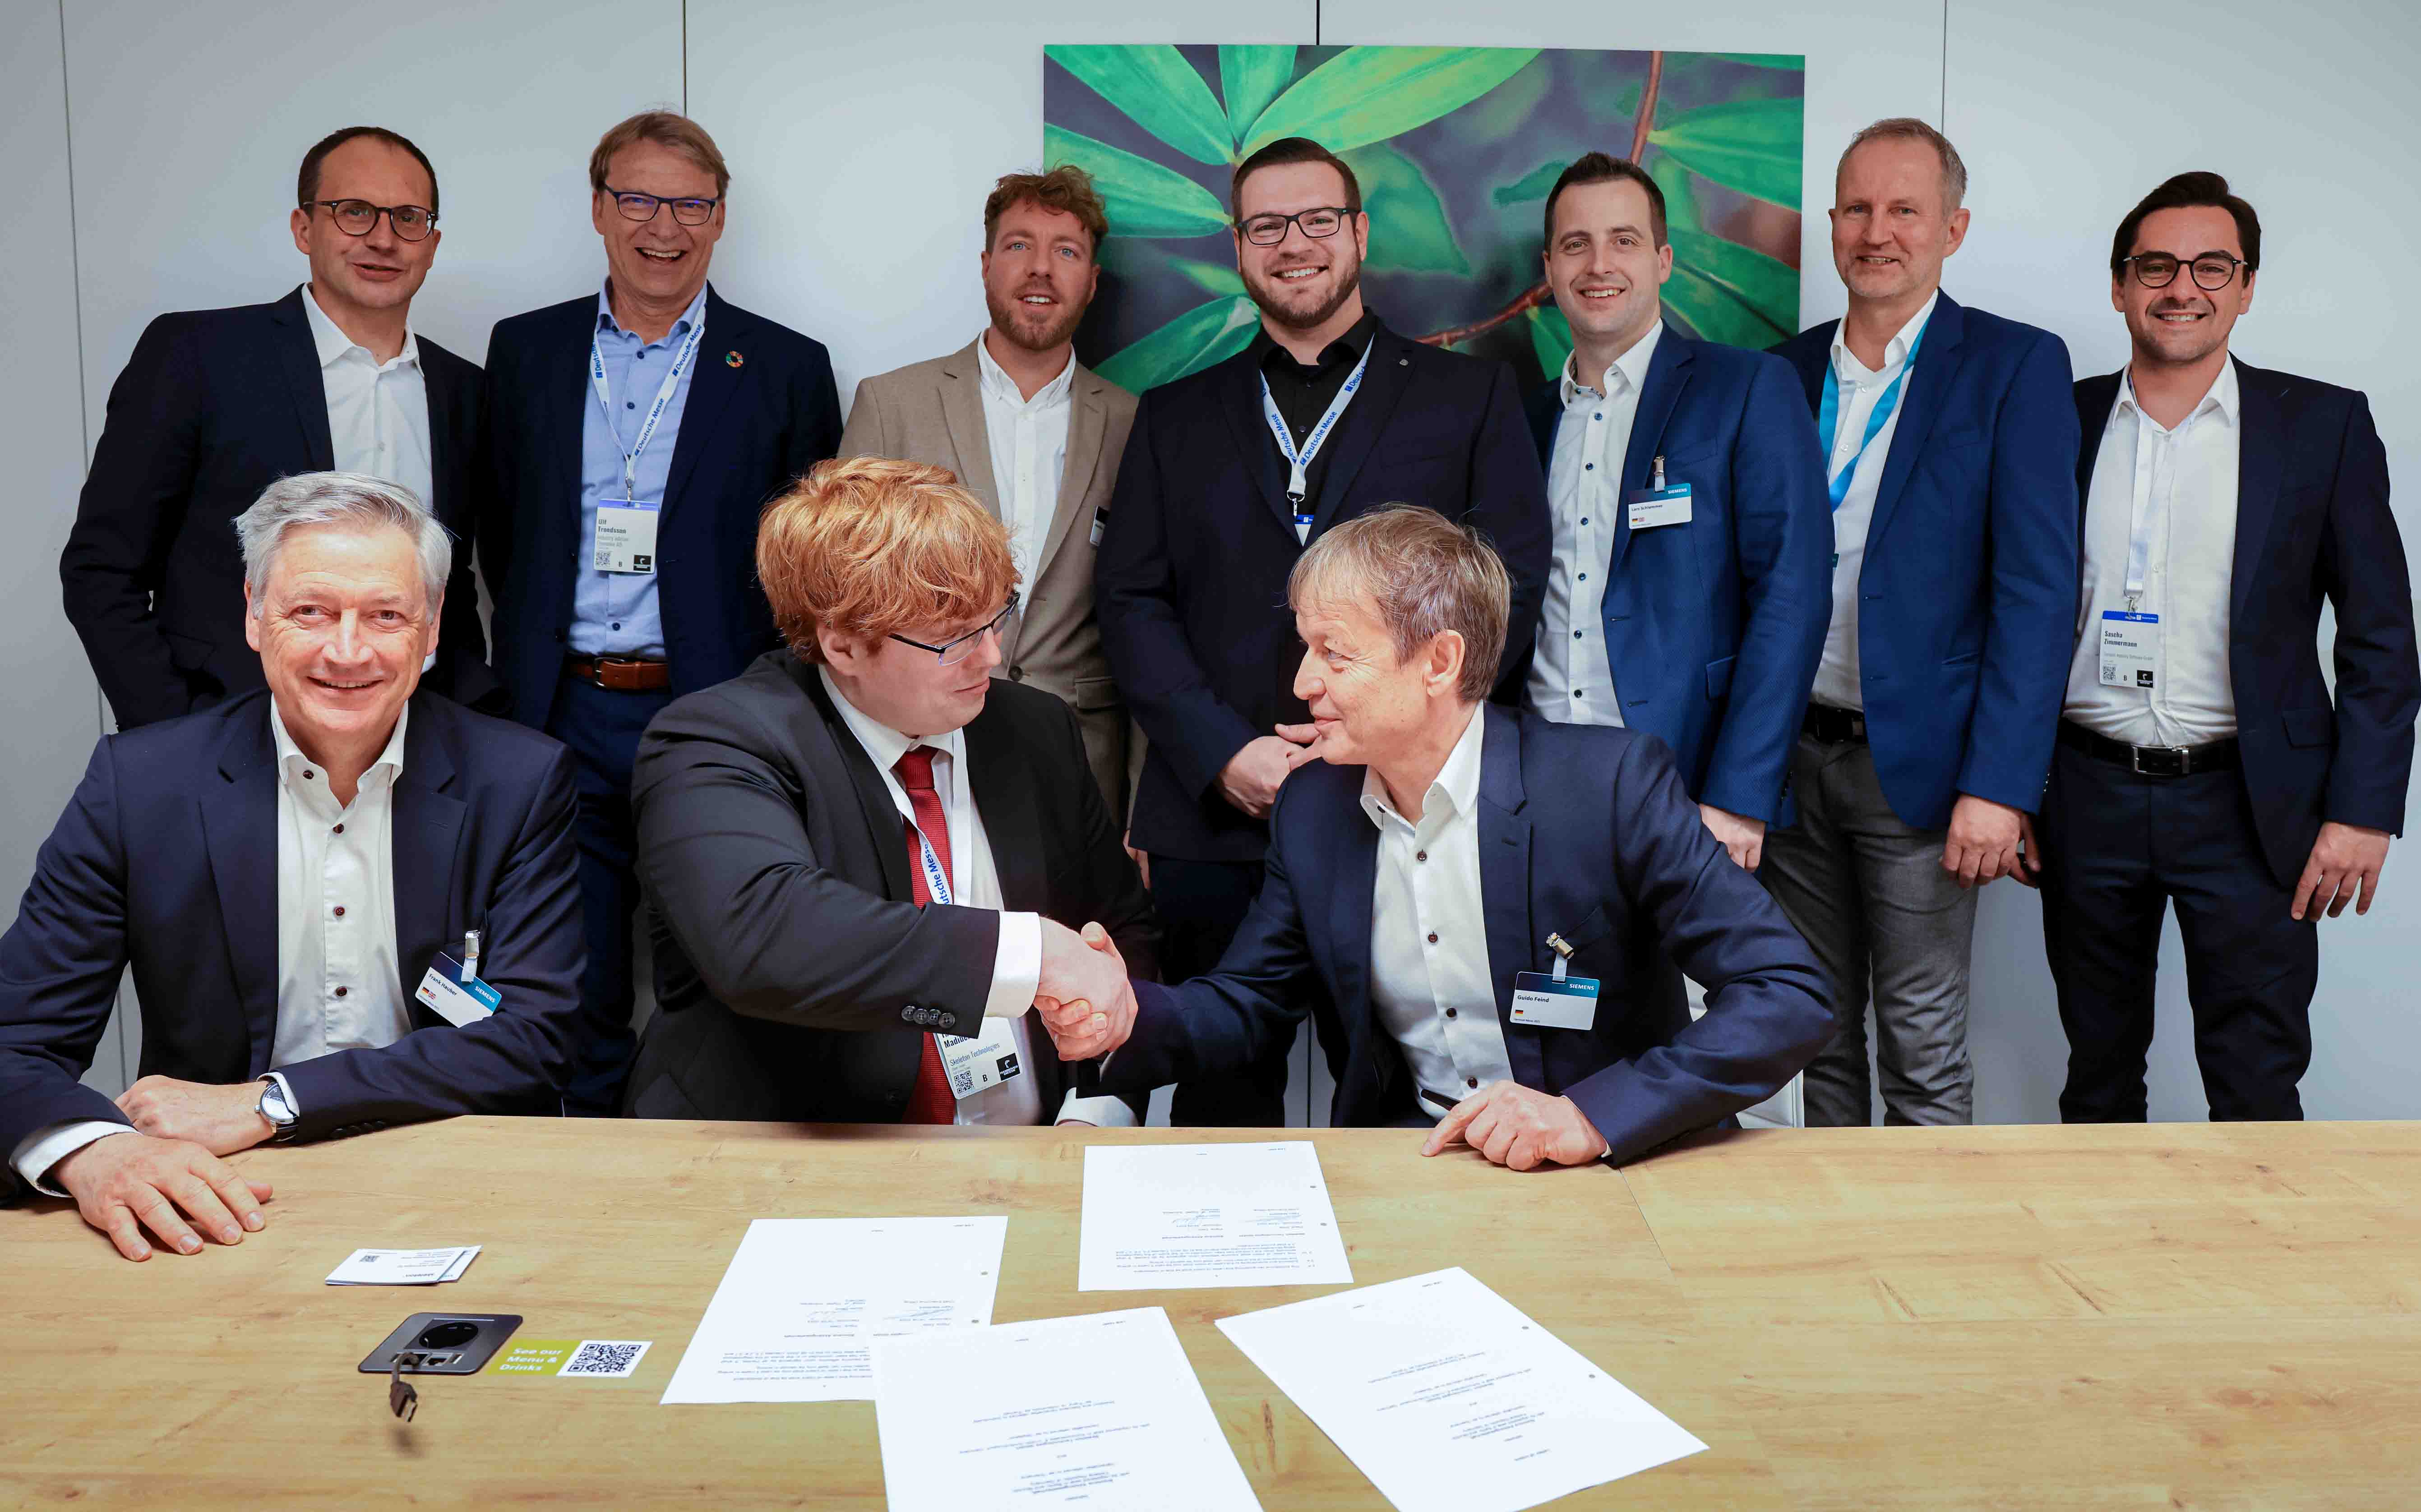 Skeleton & Siemens sign an agreement to digitalize supercapacitors production with Siemens' Manufacturing Operations Management System